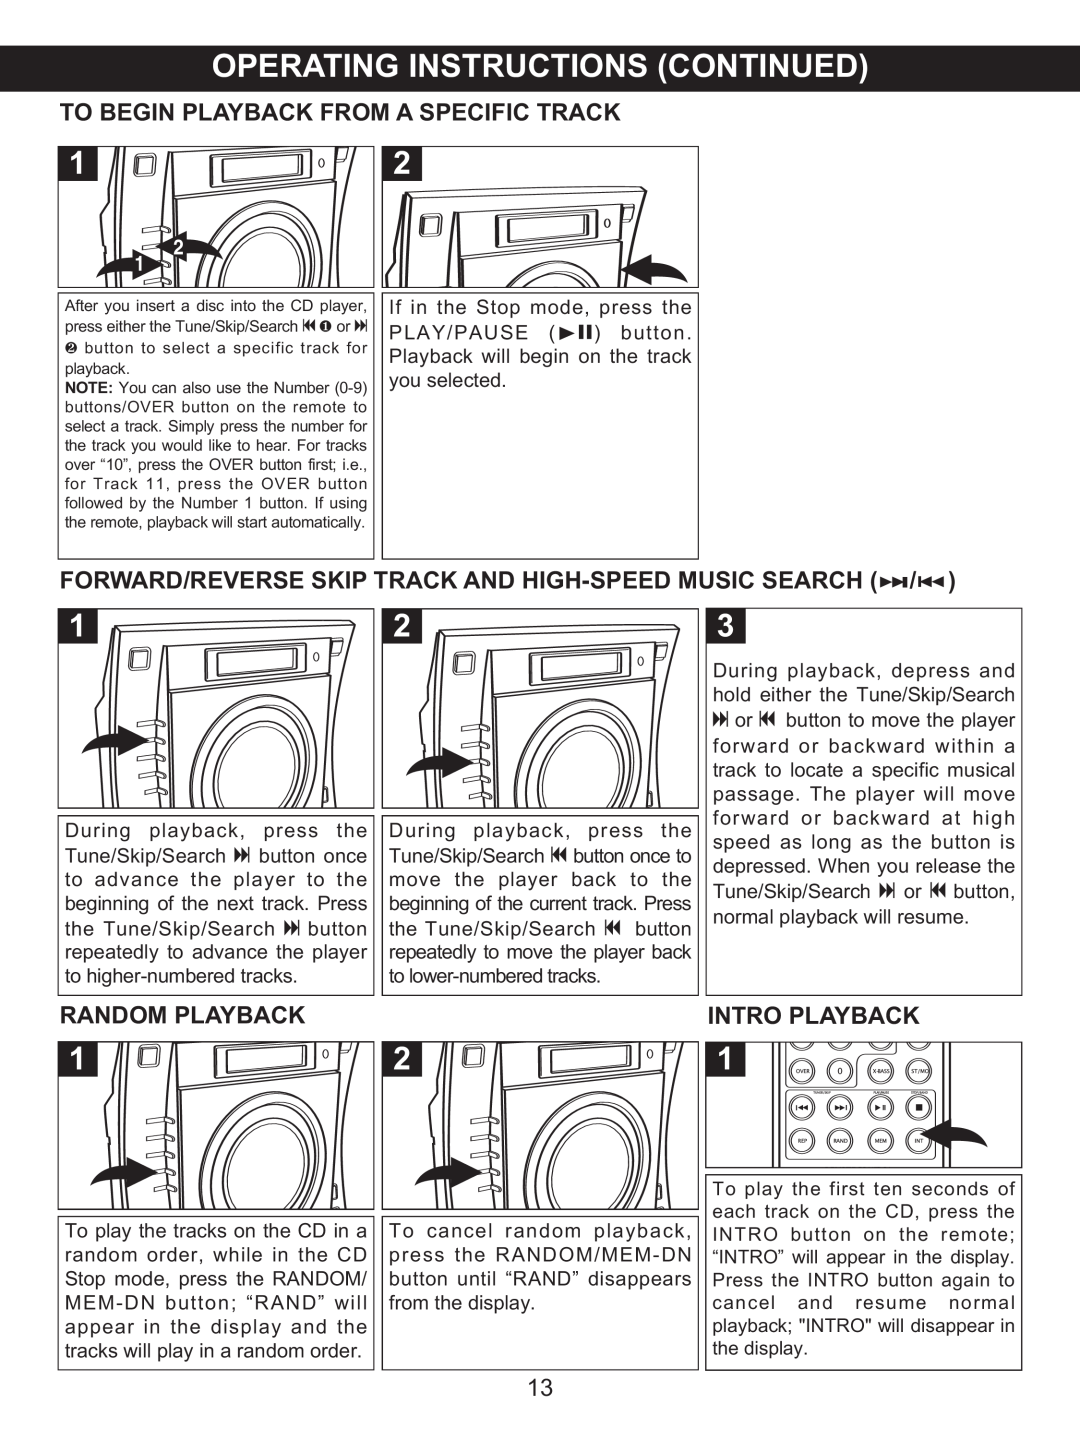 Memorex MX4137 manual To Begin Playback From A Specific Track, Random Playback, Intro Playback 